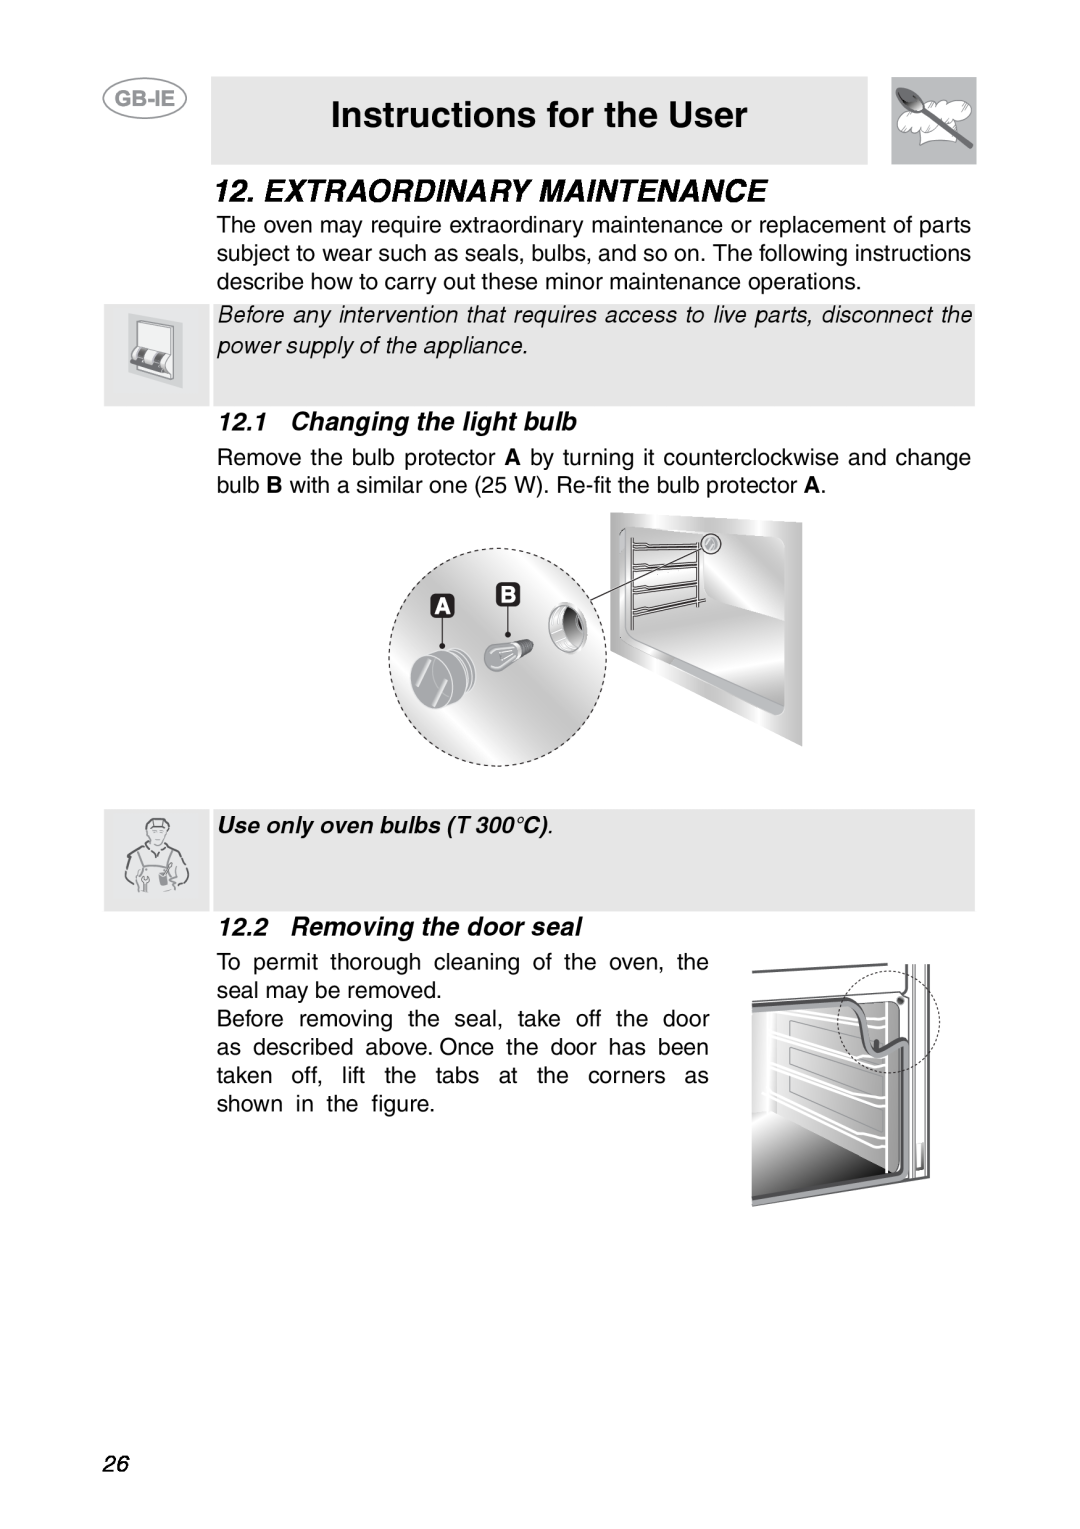 Smeg SCDK398X manual Extraordinary Maintenance, Instructions for the User, Changing the light bulb, Removing the door seal 